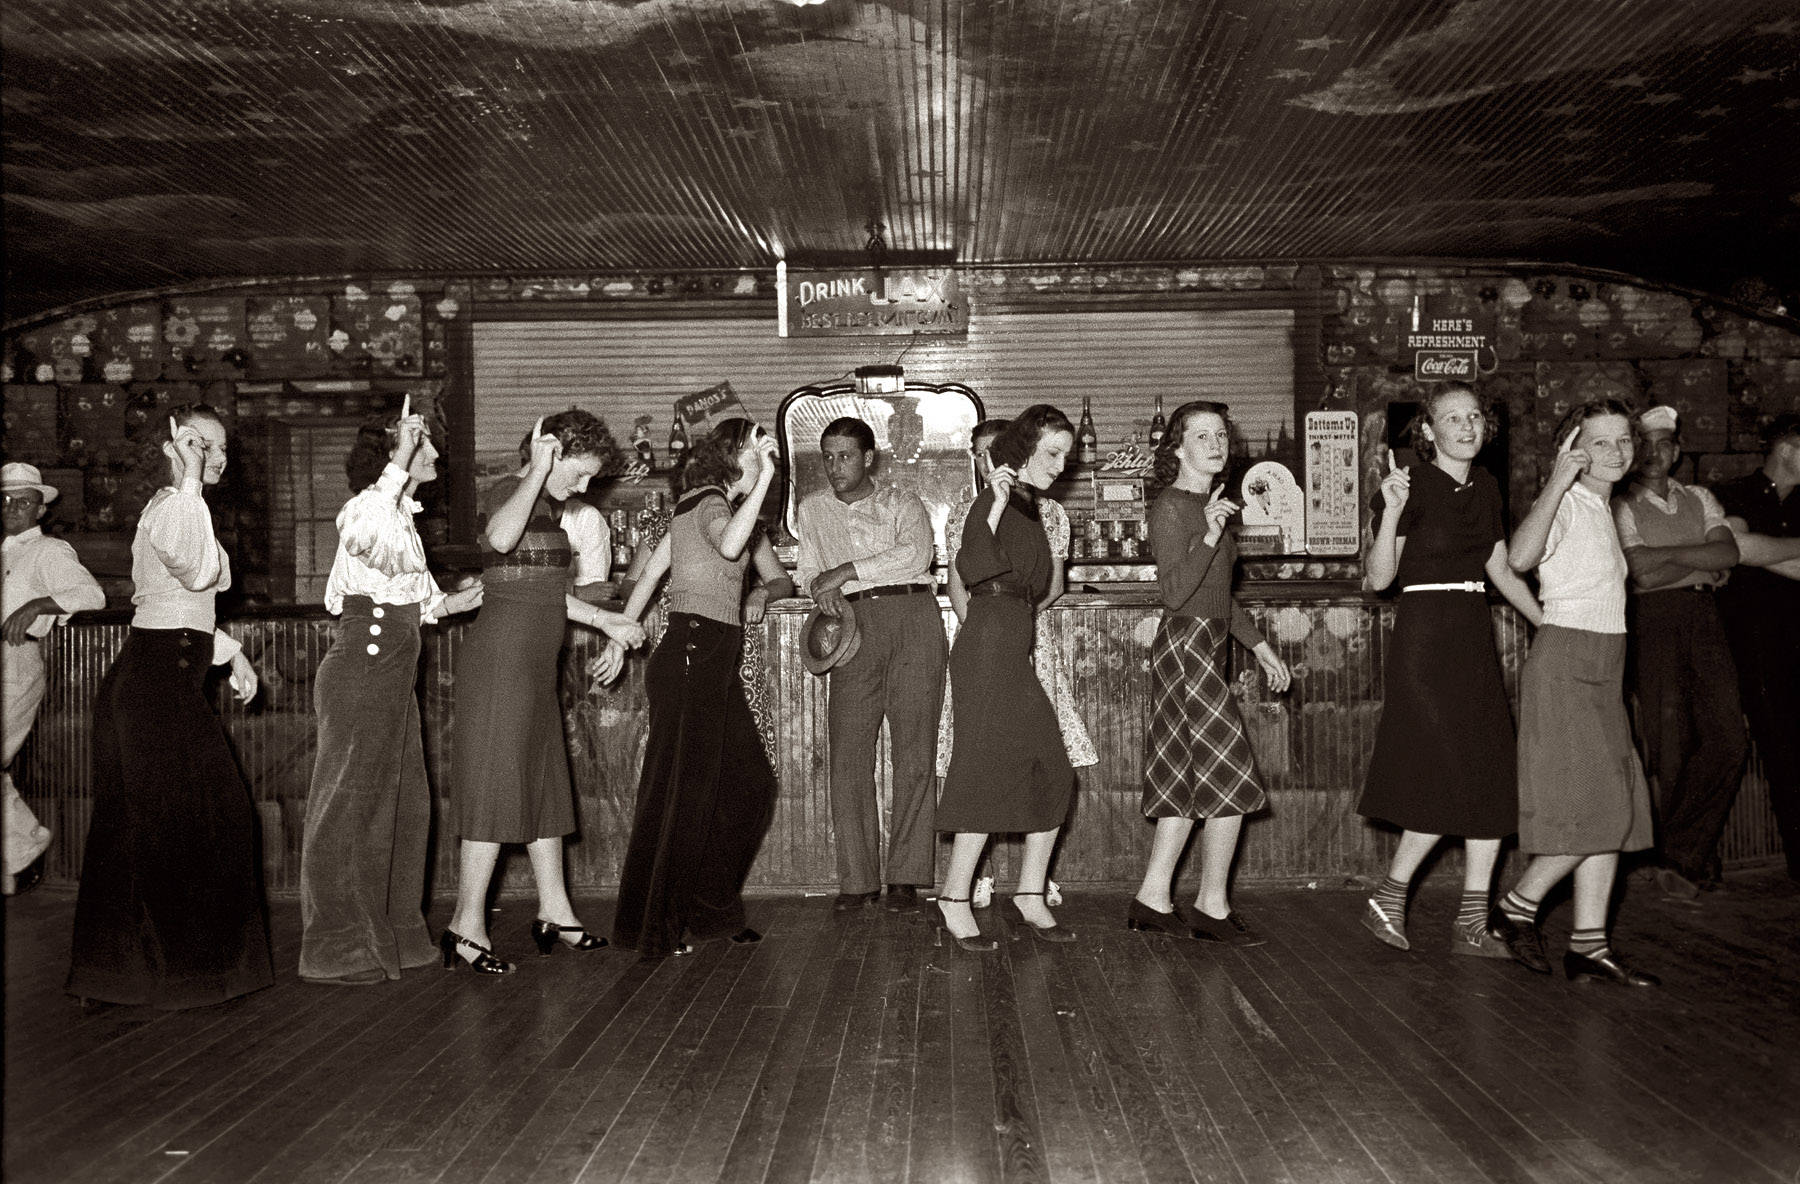 October 1938. "Roadhouse. Raceland, Louisiana. Girls at Dano's for free Friday night crab boil." View full size. 35mm negative by Russell Lee for the FSA.